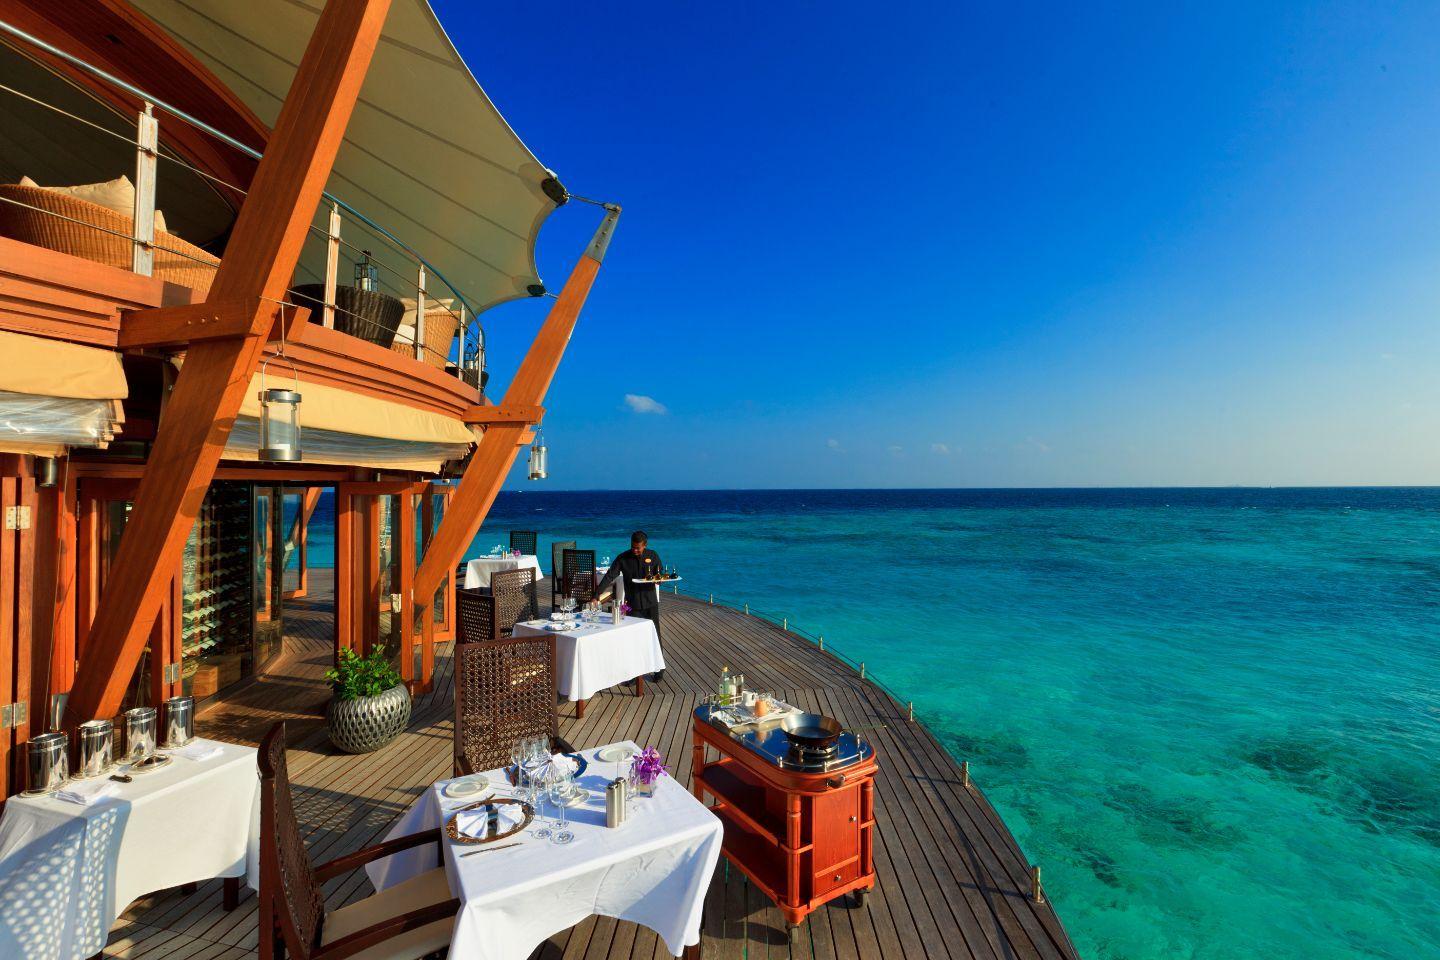 20% off in 5 star Baros Maldives over Christmas and New Year holidays 